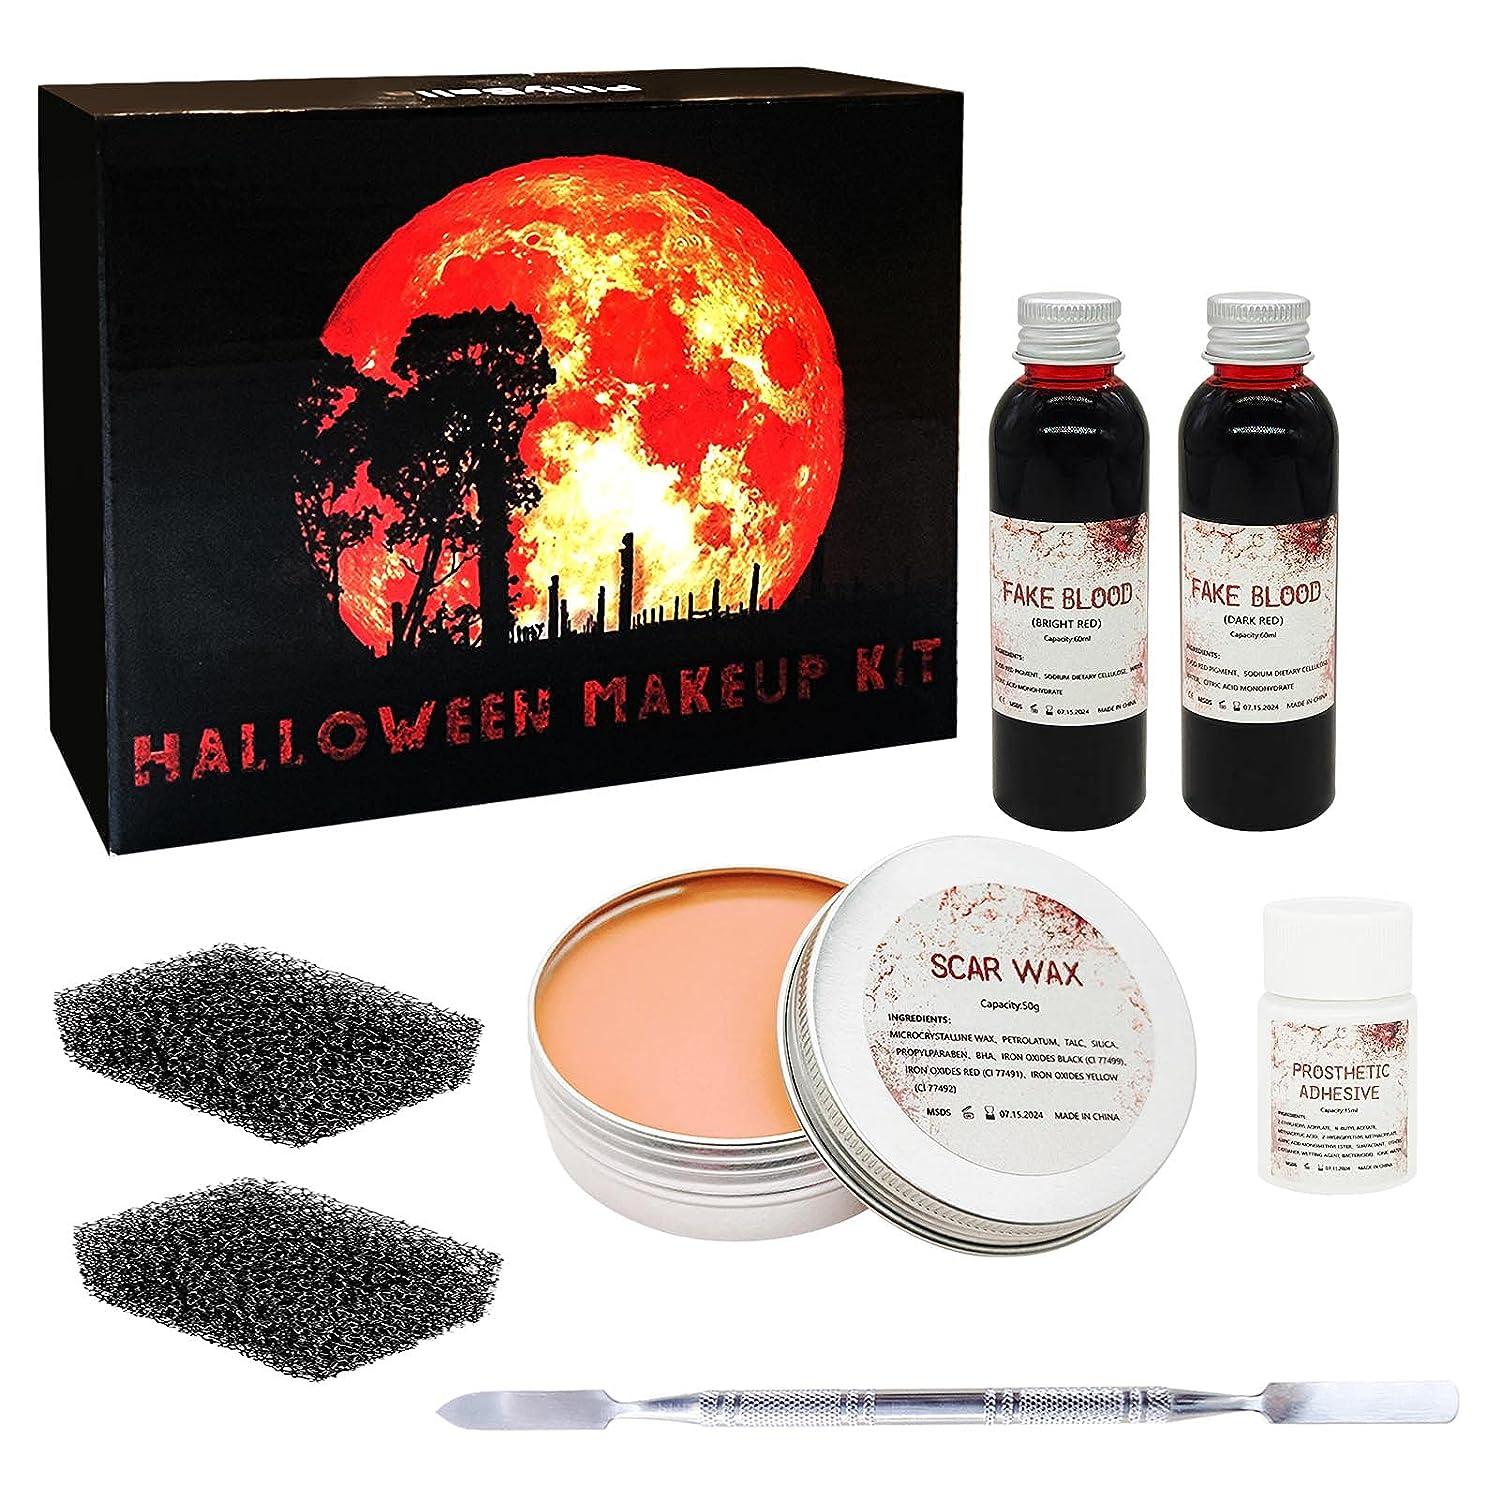  Halloween Makeup Kit Scars Wax, Halloween Fake Blood Makeup Kit  ,Scary Face Makeup Fake Wound Scar Wax Stage Fake Wound Professional Makeup  Palettes for Art, Theater, Halloween, Parties and Cosplay 